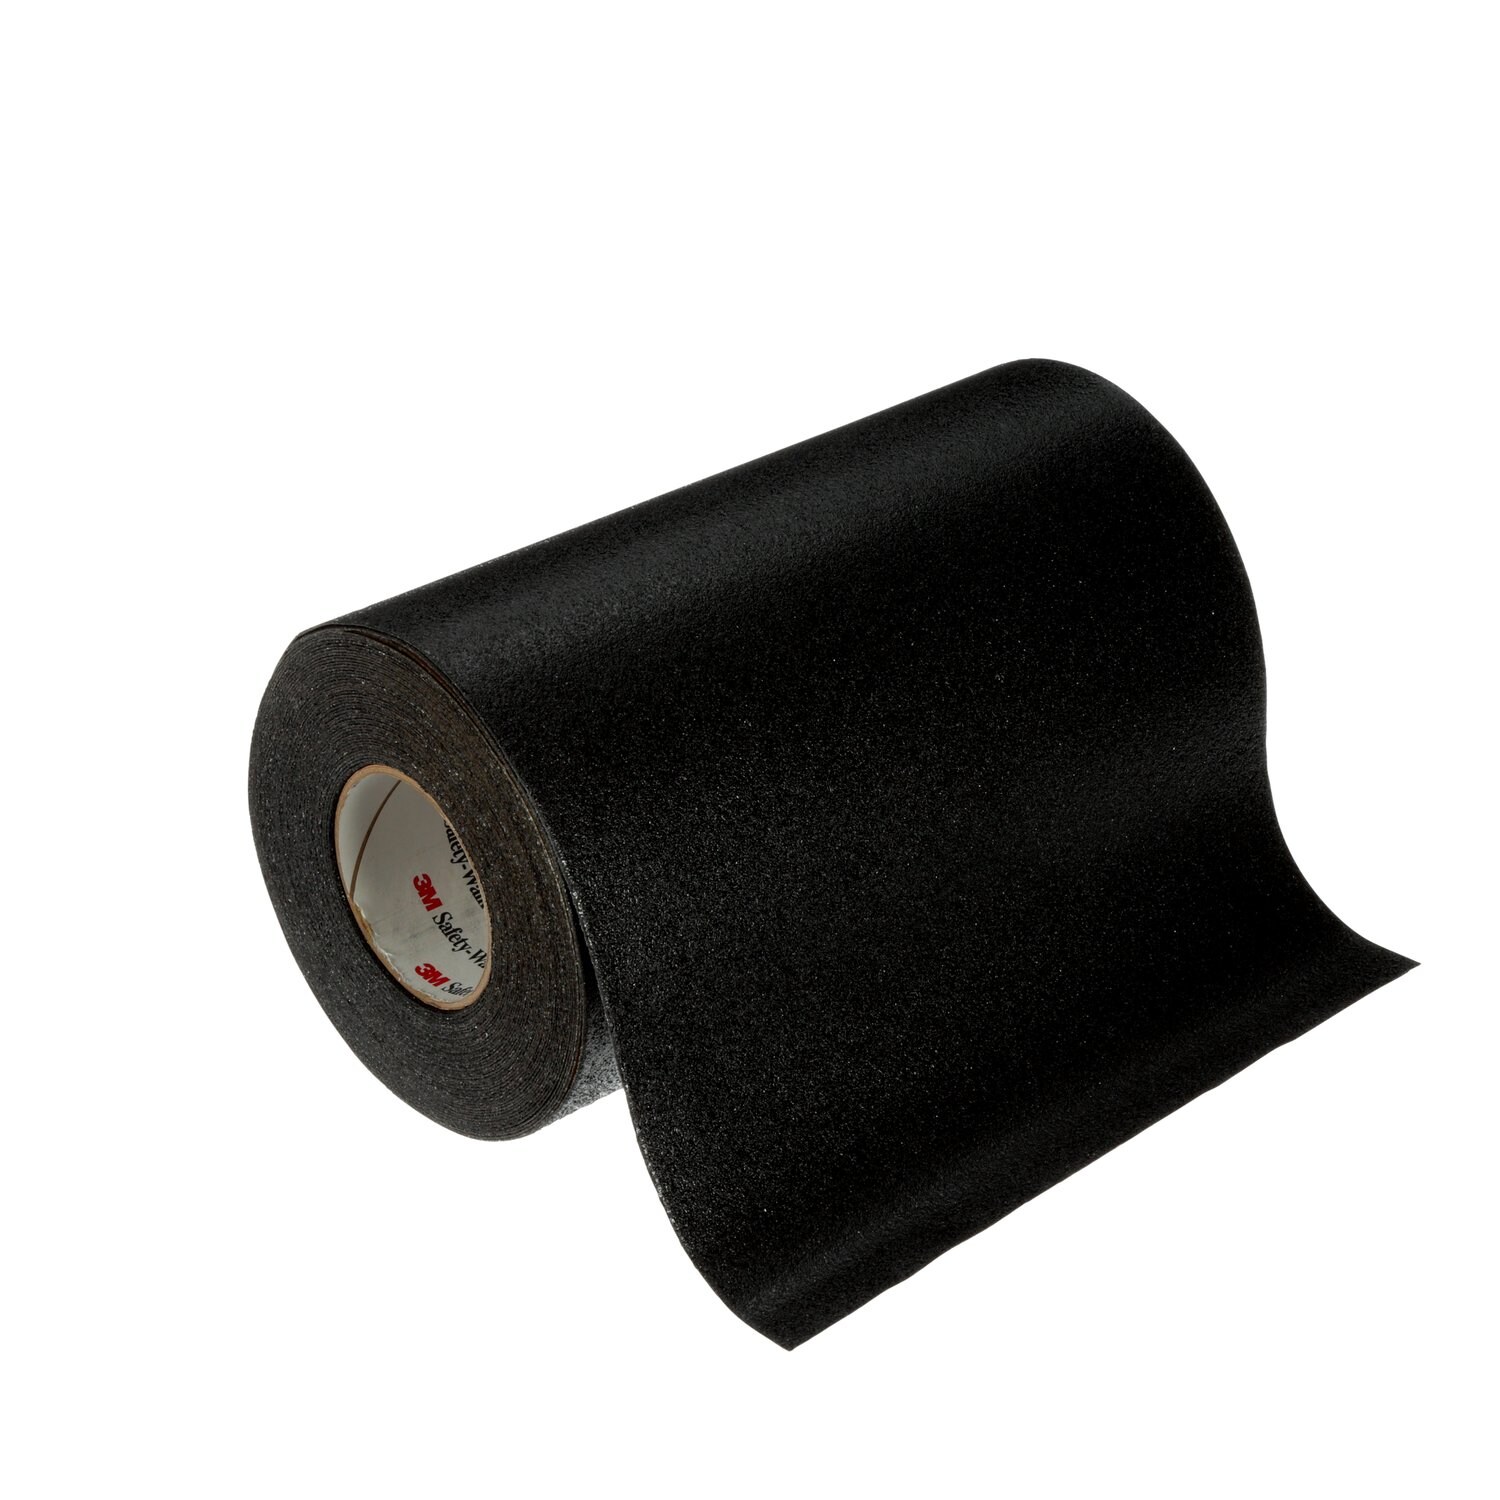 7010340874 - 3M Safety-Walk Slip-Resistant Conformable Tapes & Treads 510, Black,
49.25 in x 120 ft, Untrimmed Jumbo Roll